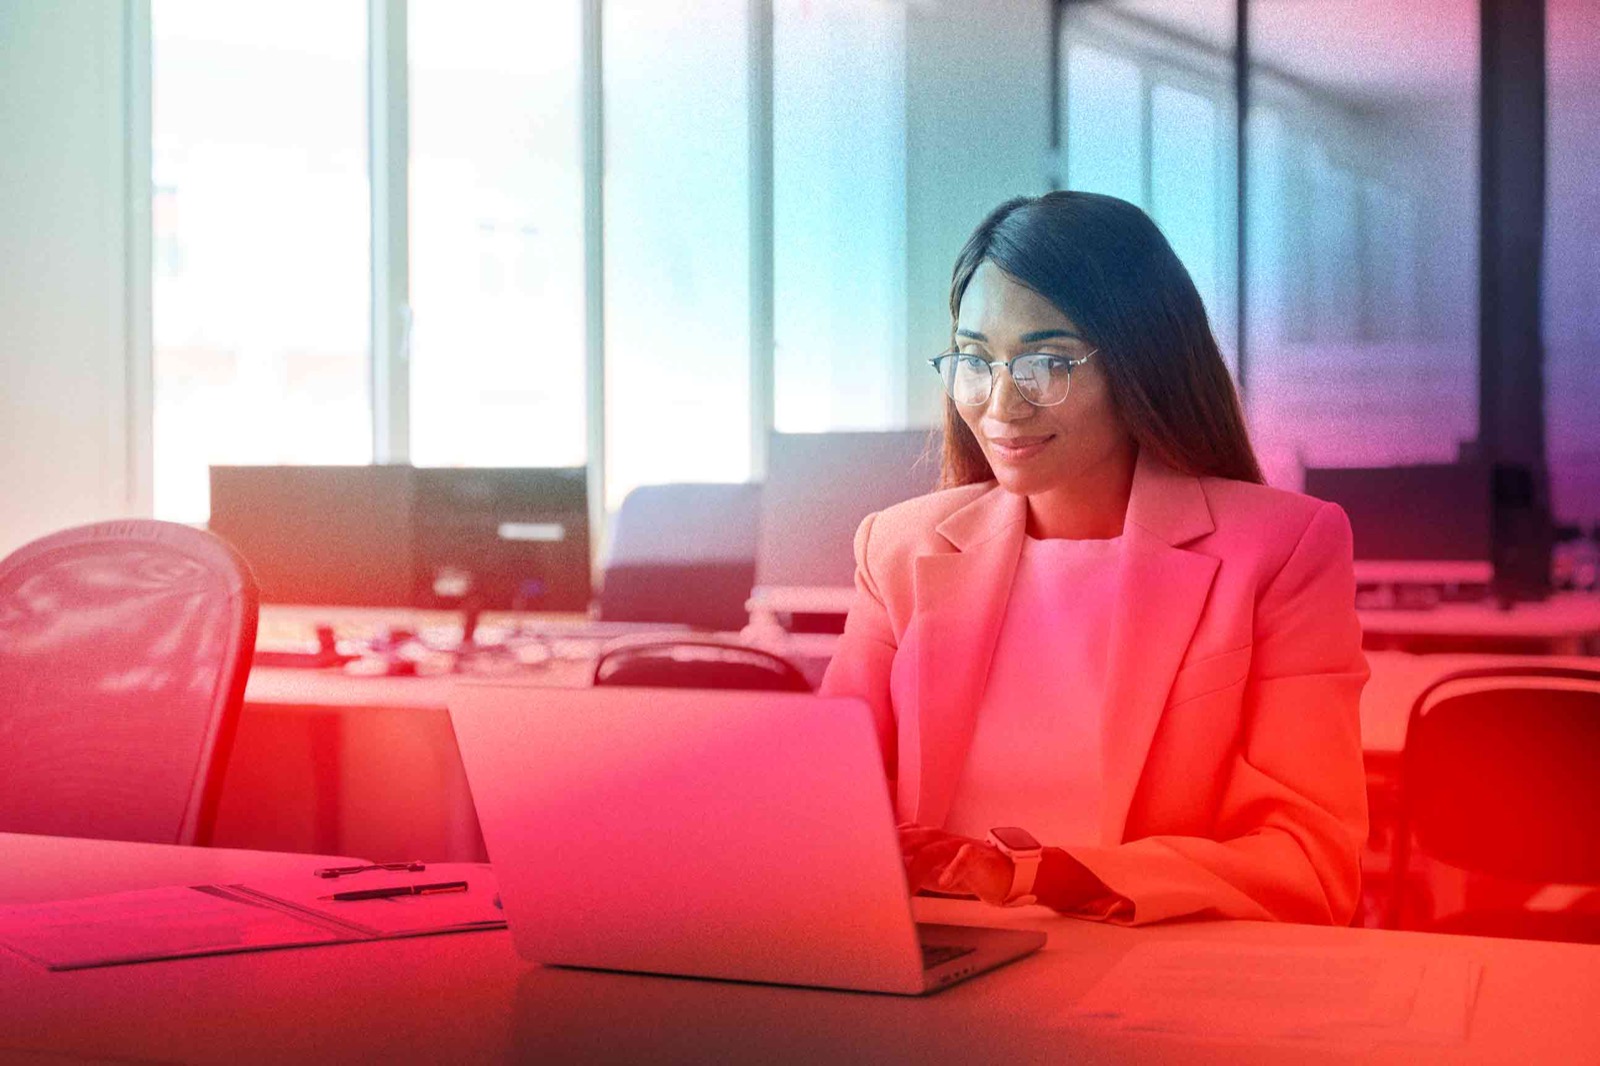 smiling woman in blazer using business software on her laptop